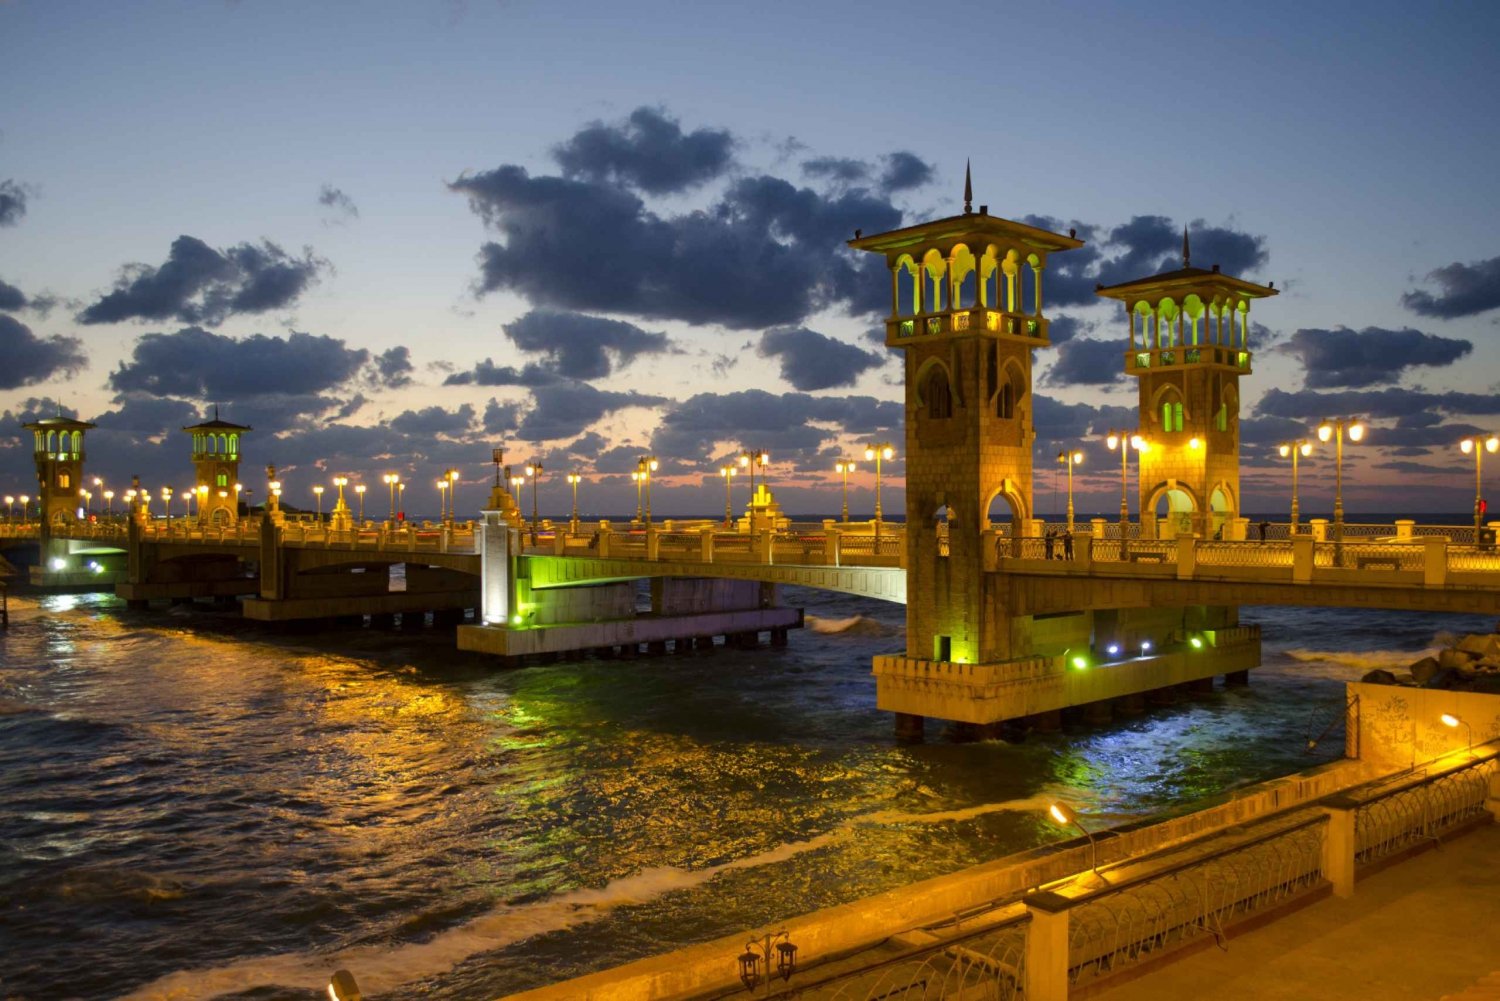 From Cairo: Alexandria Day Tour